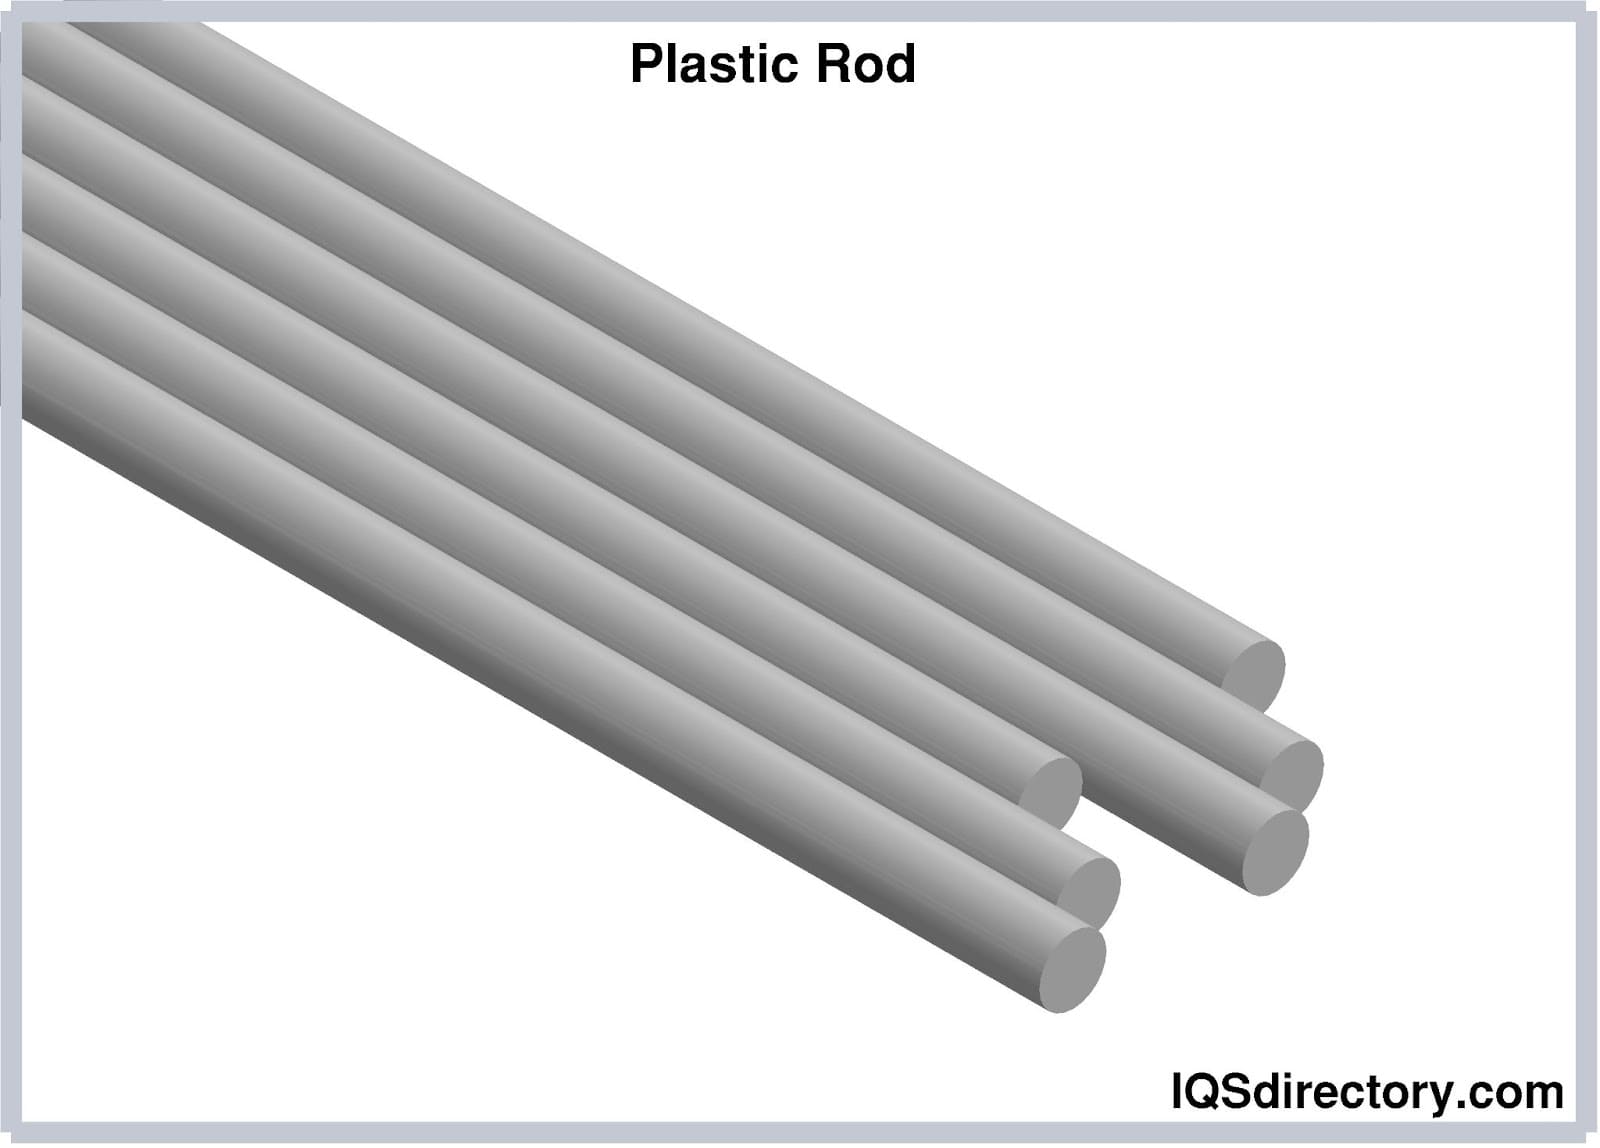 Plastic Rods: Definition, Types, Applications, and Benefits